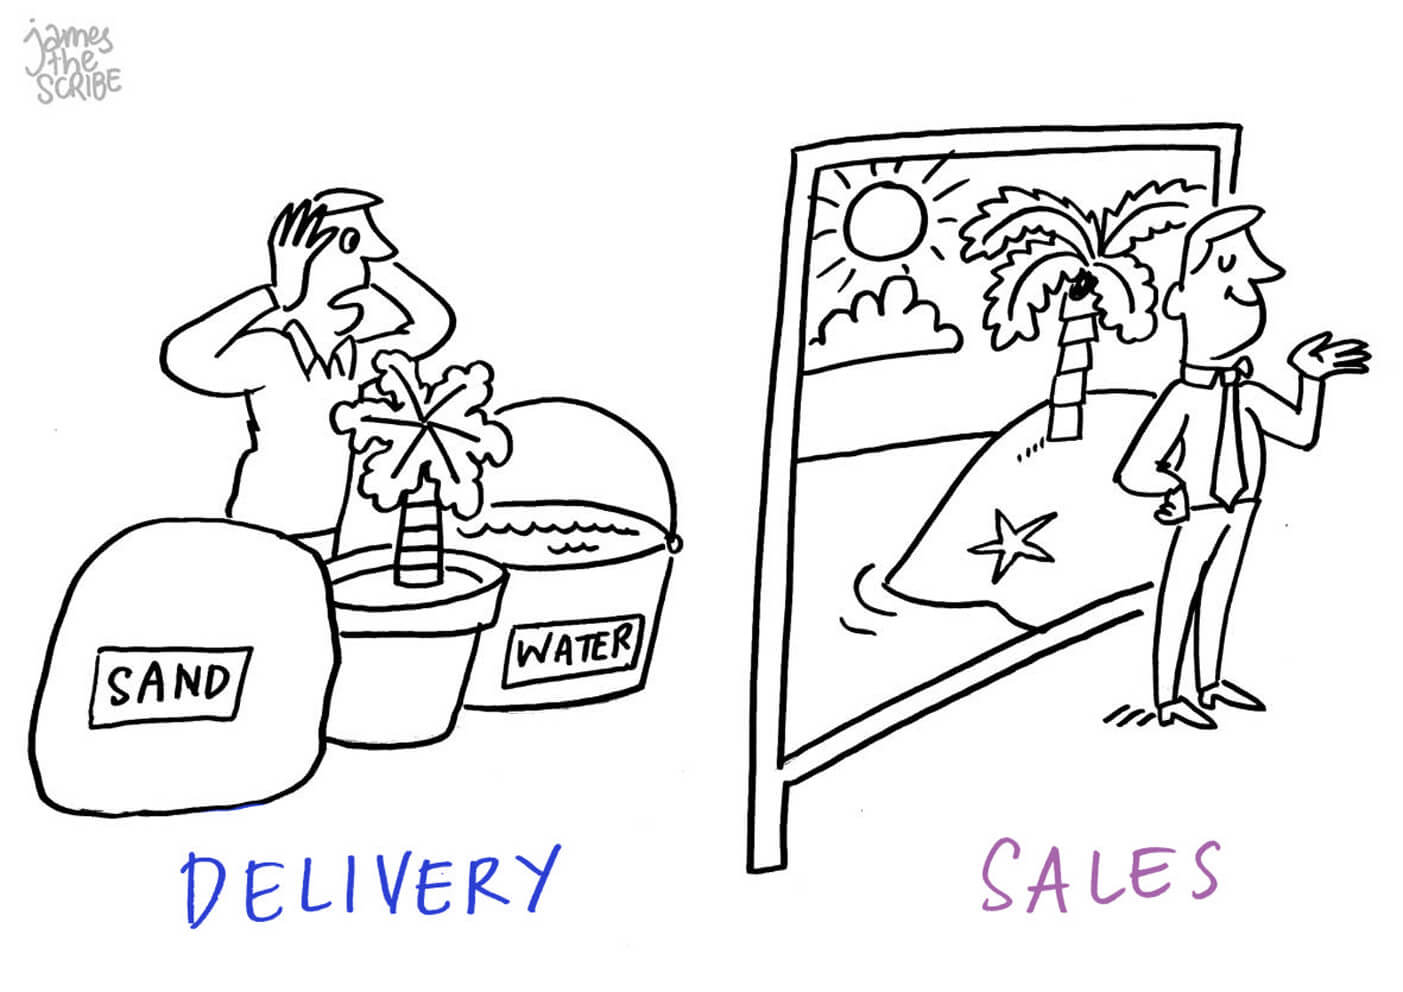 22_delivery-and-sales.jpg